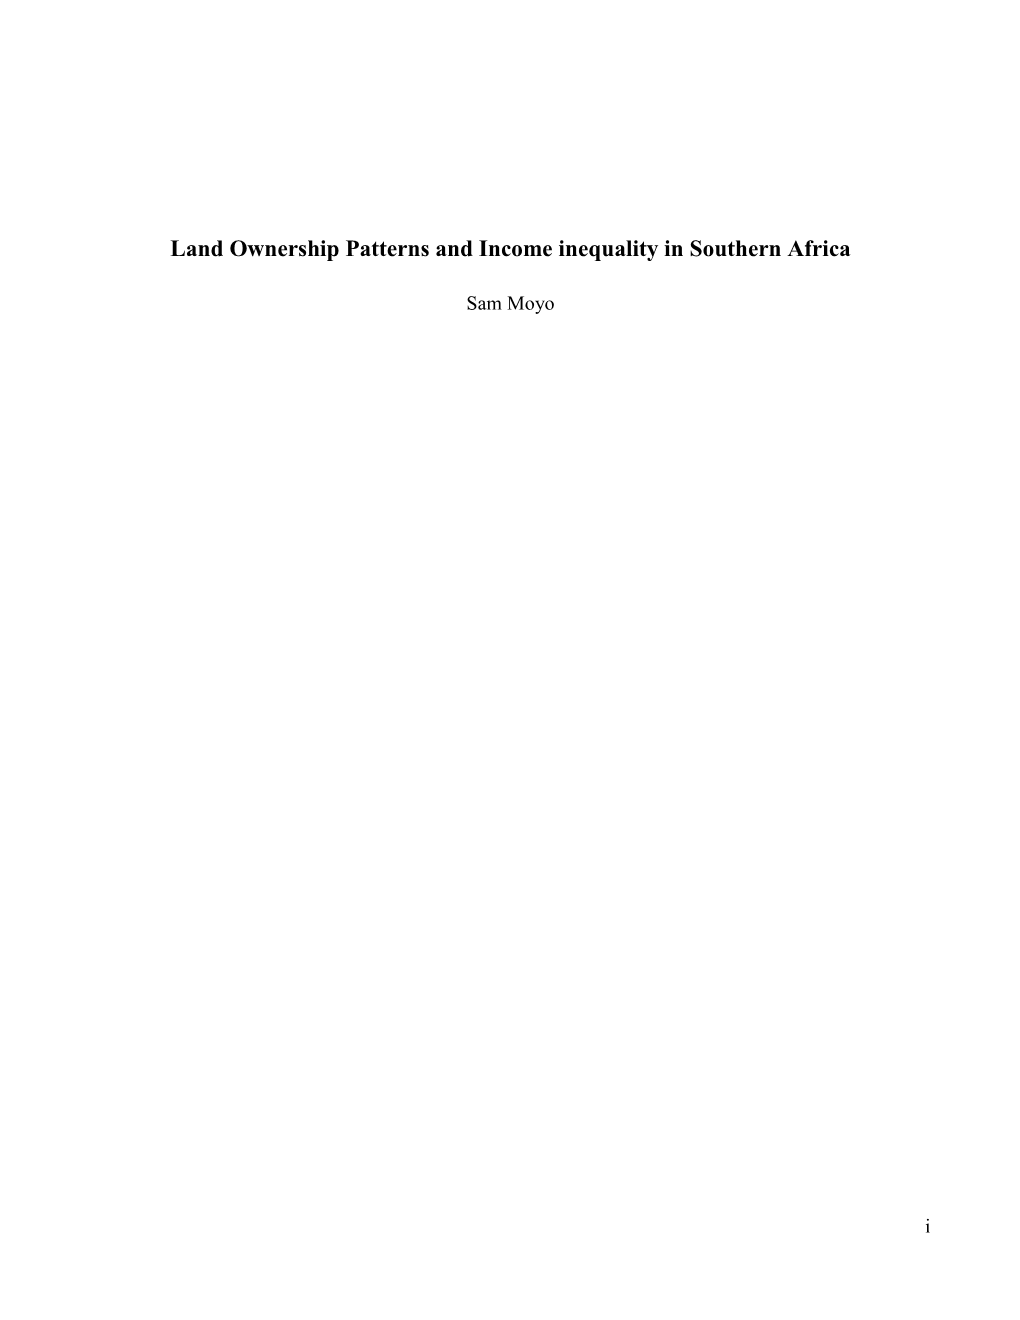 Land Ownership Patterns and Income Inequality in Southern Africa